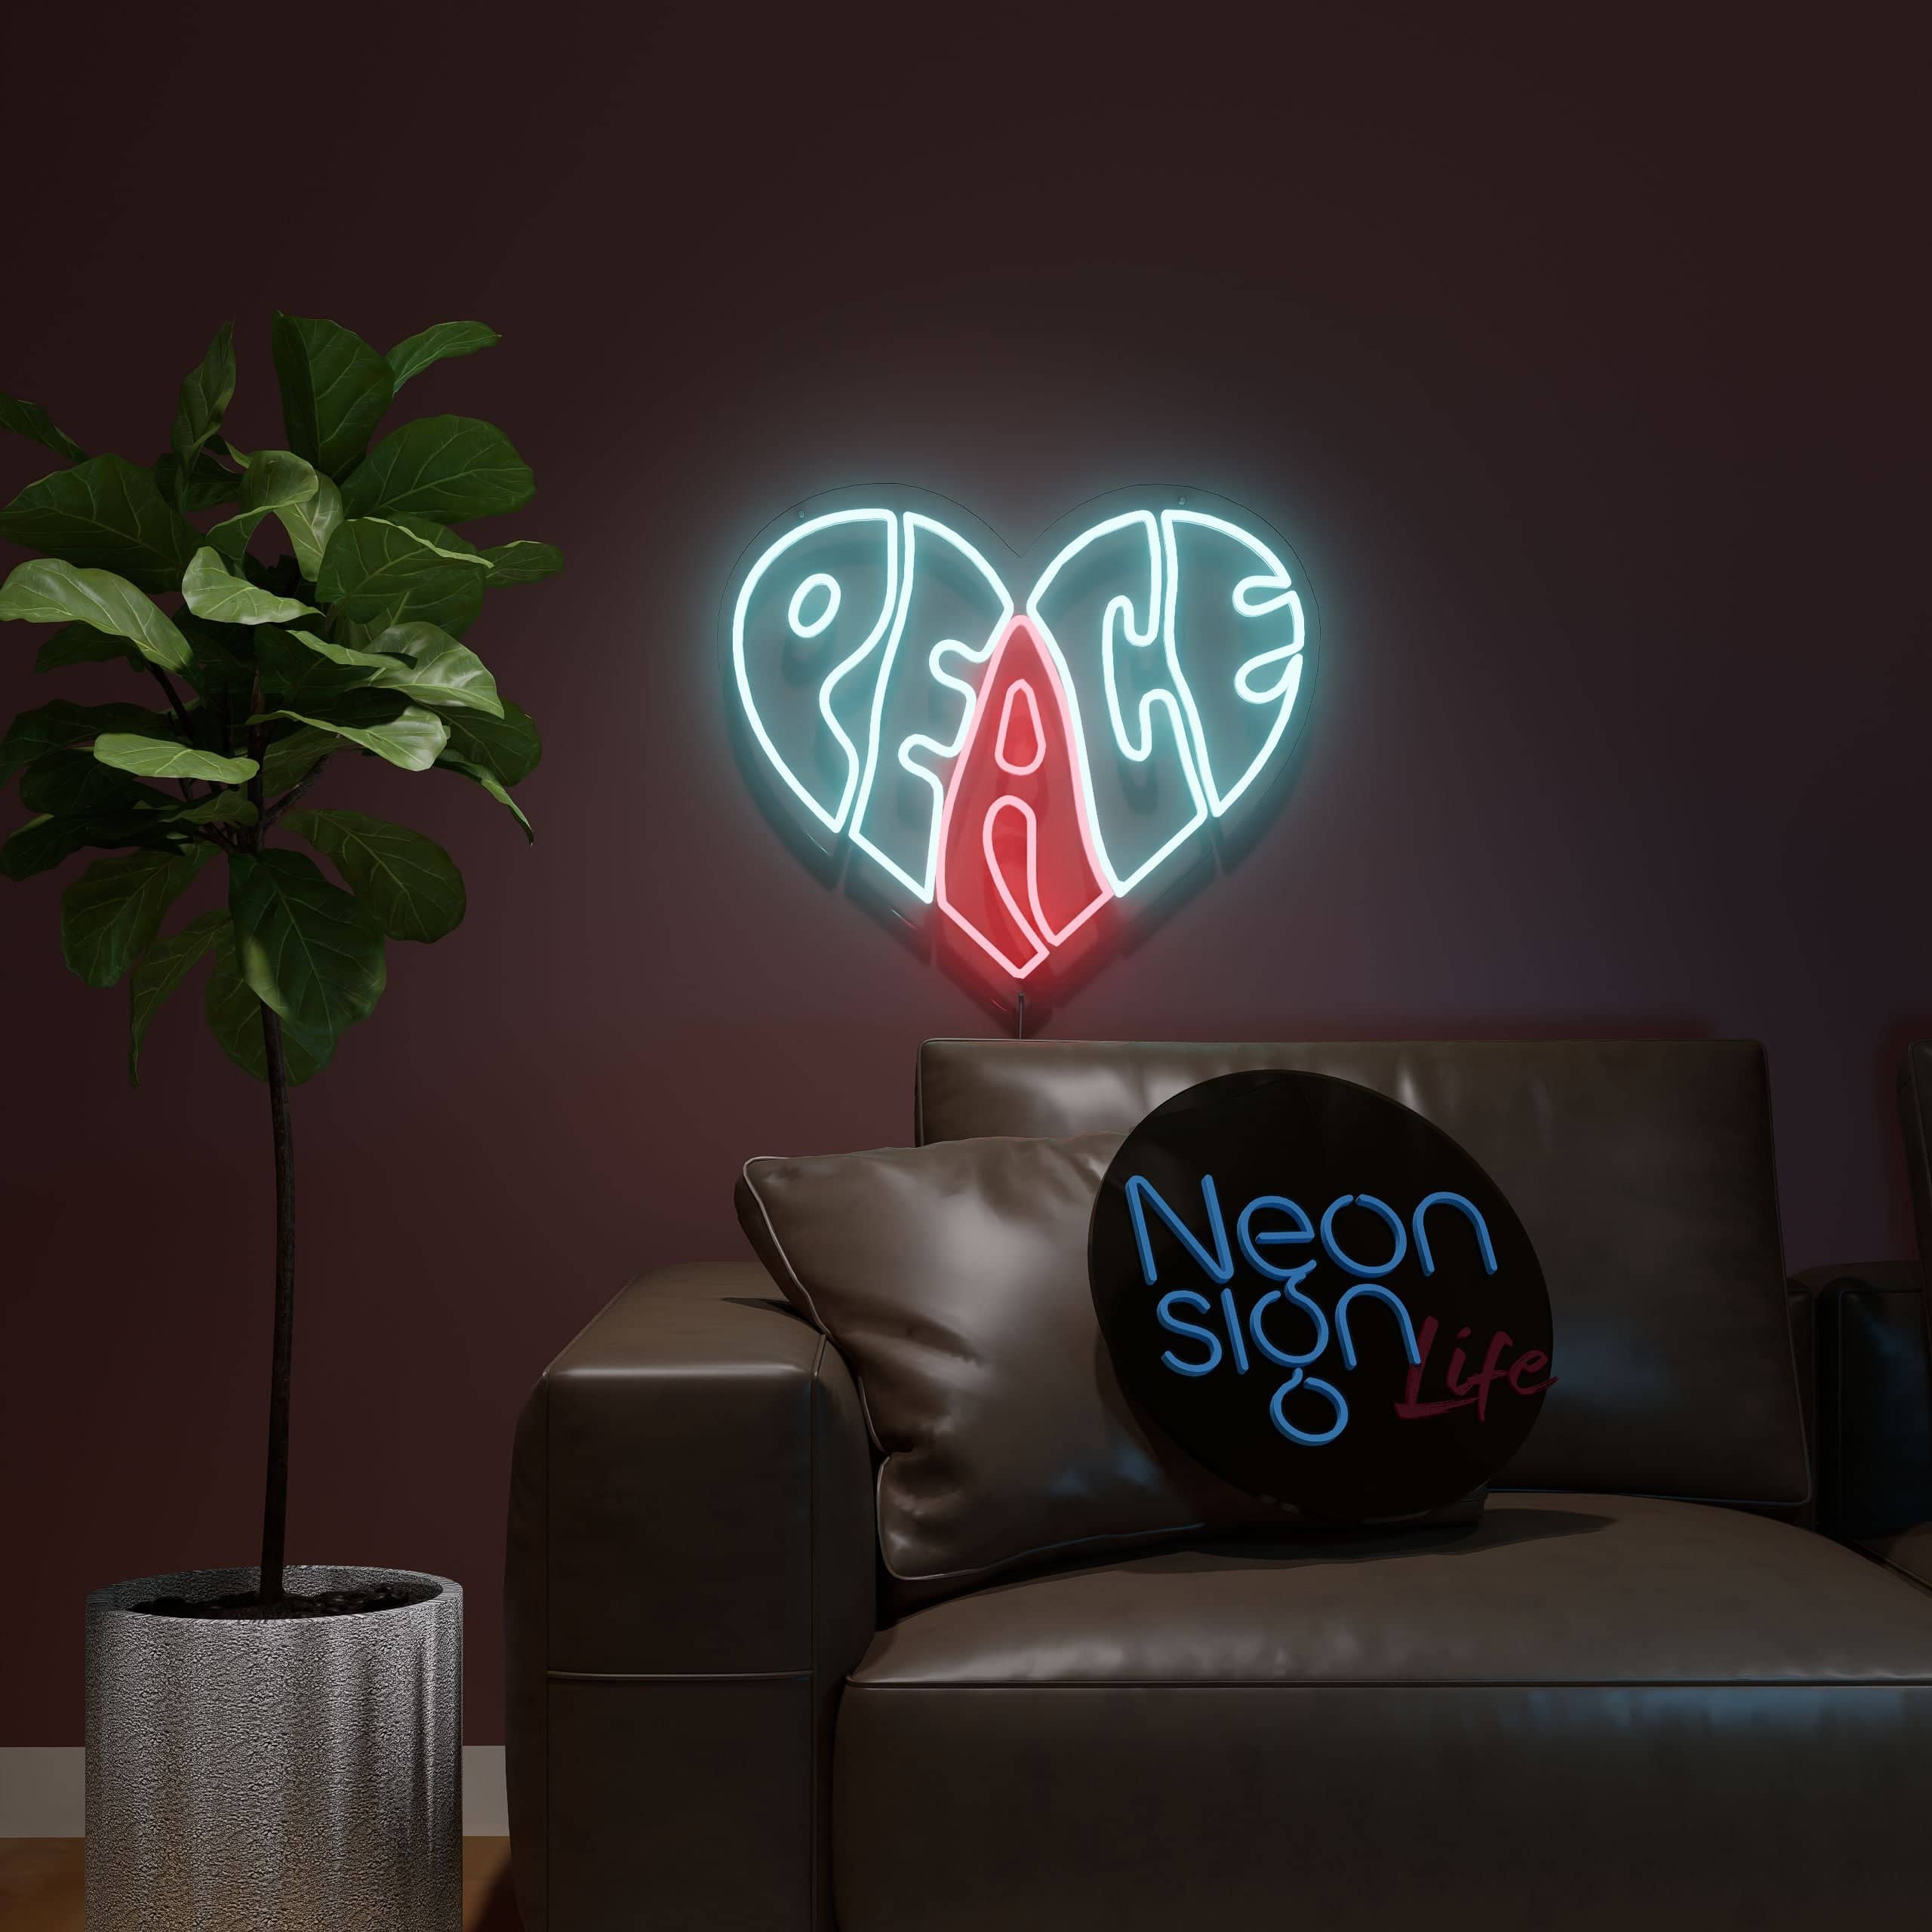 peaceful-state-neon-sign-lite